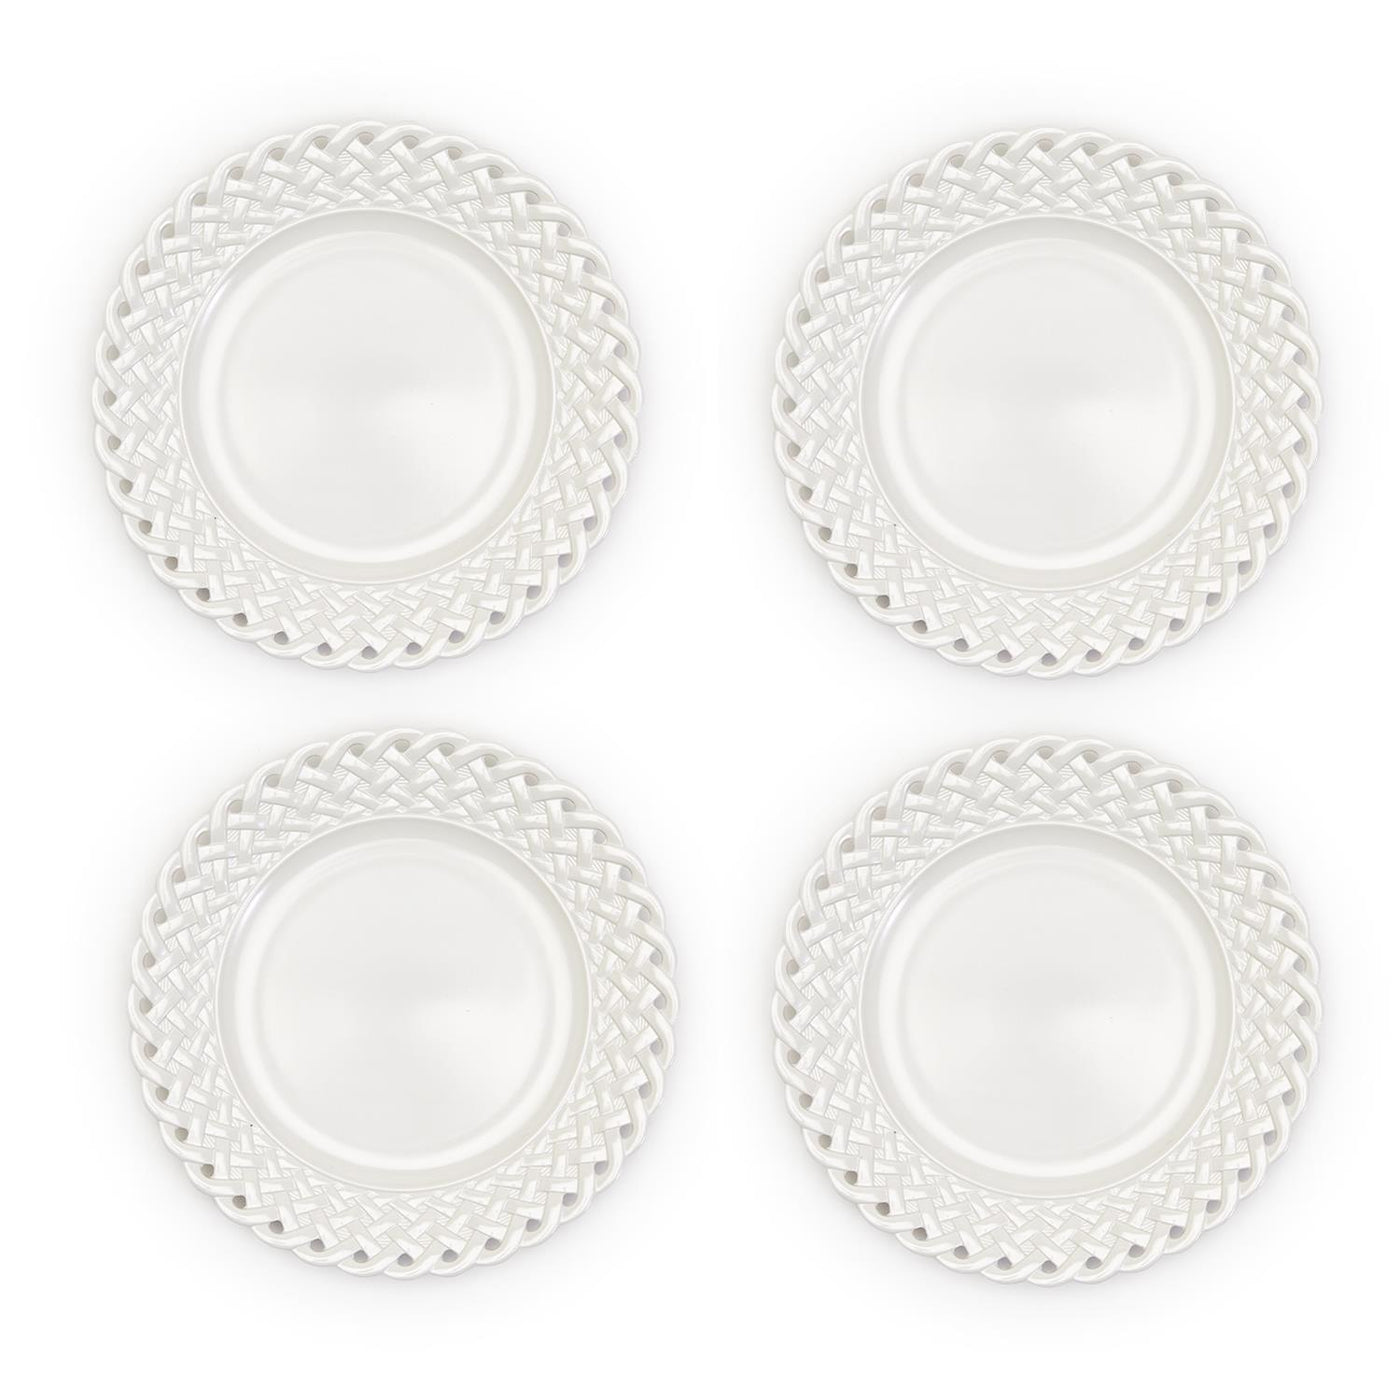 Latice Set of 4 Dinner Plates-Home/Giftware-Kevin's Fine Outdoor Gear & Apparel